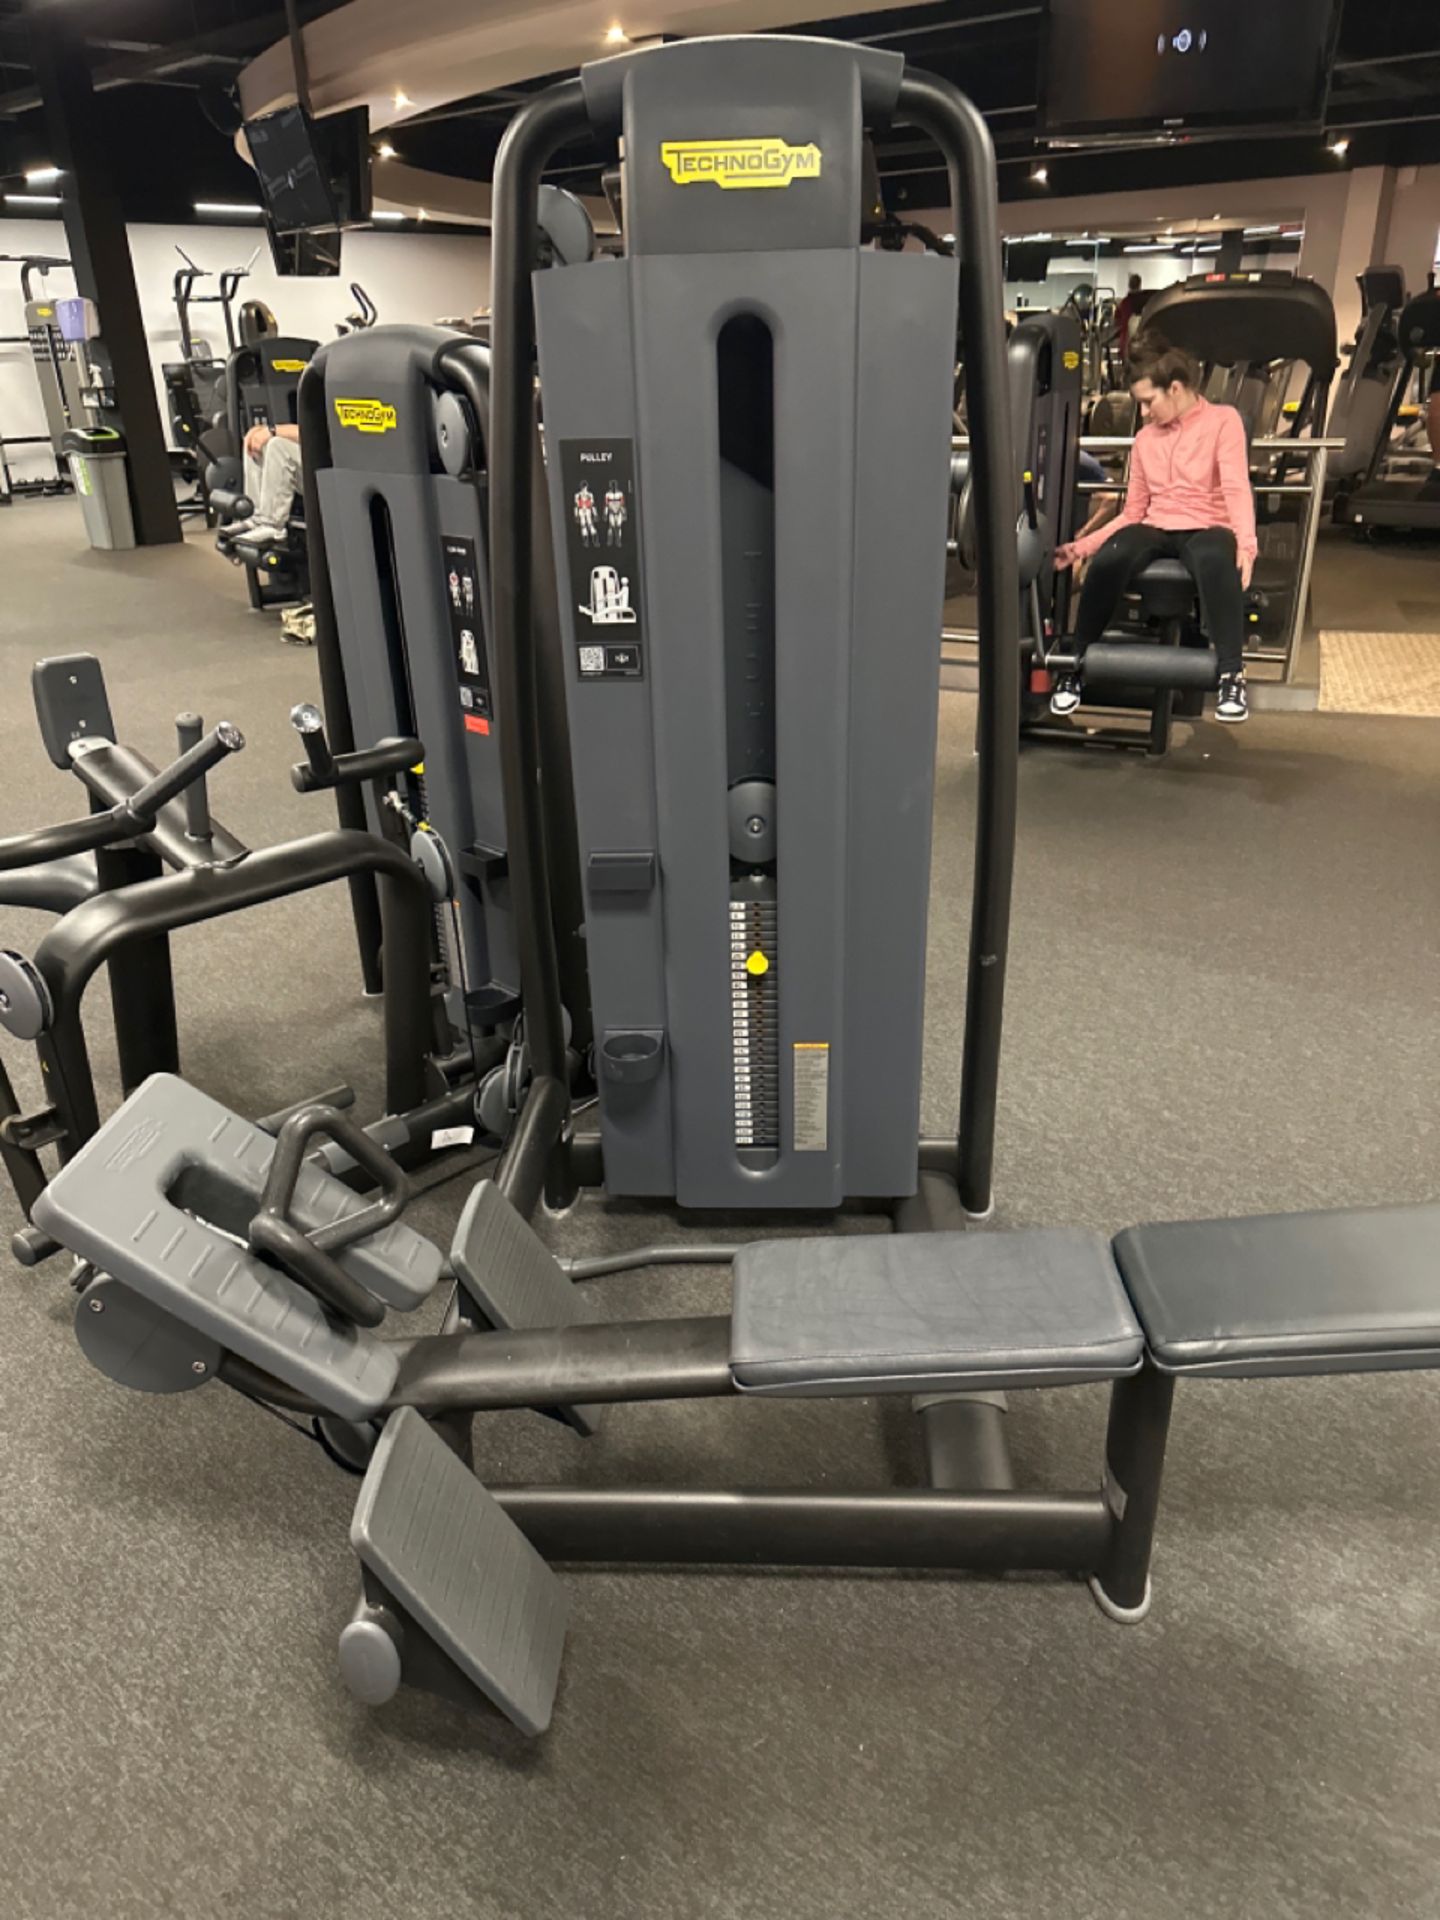 Technogym Selection 700 Pulley Machine